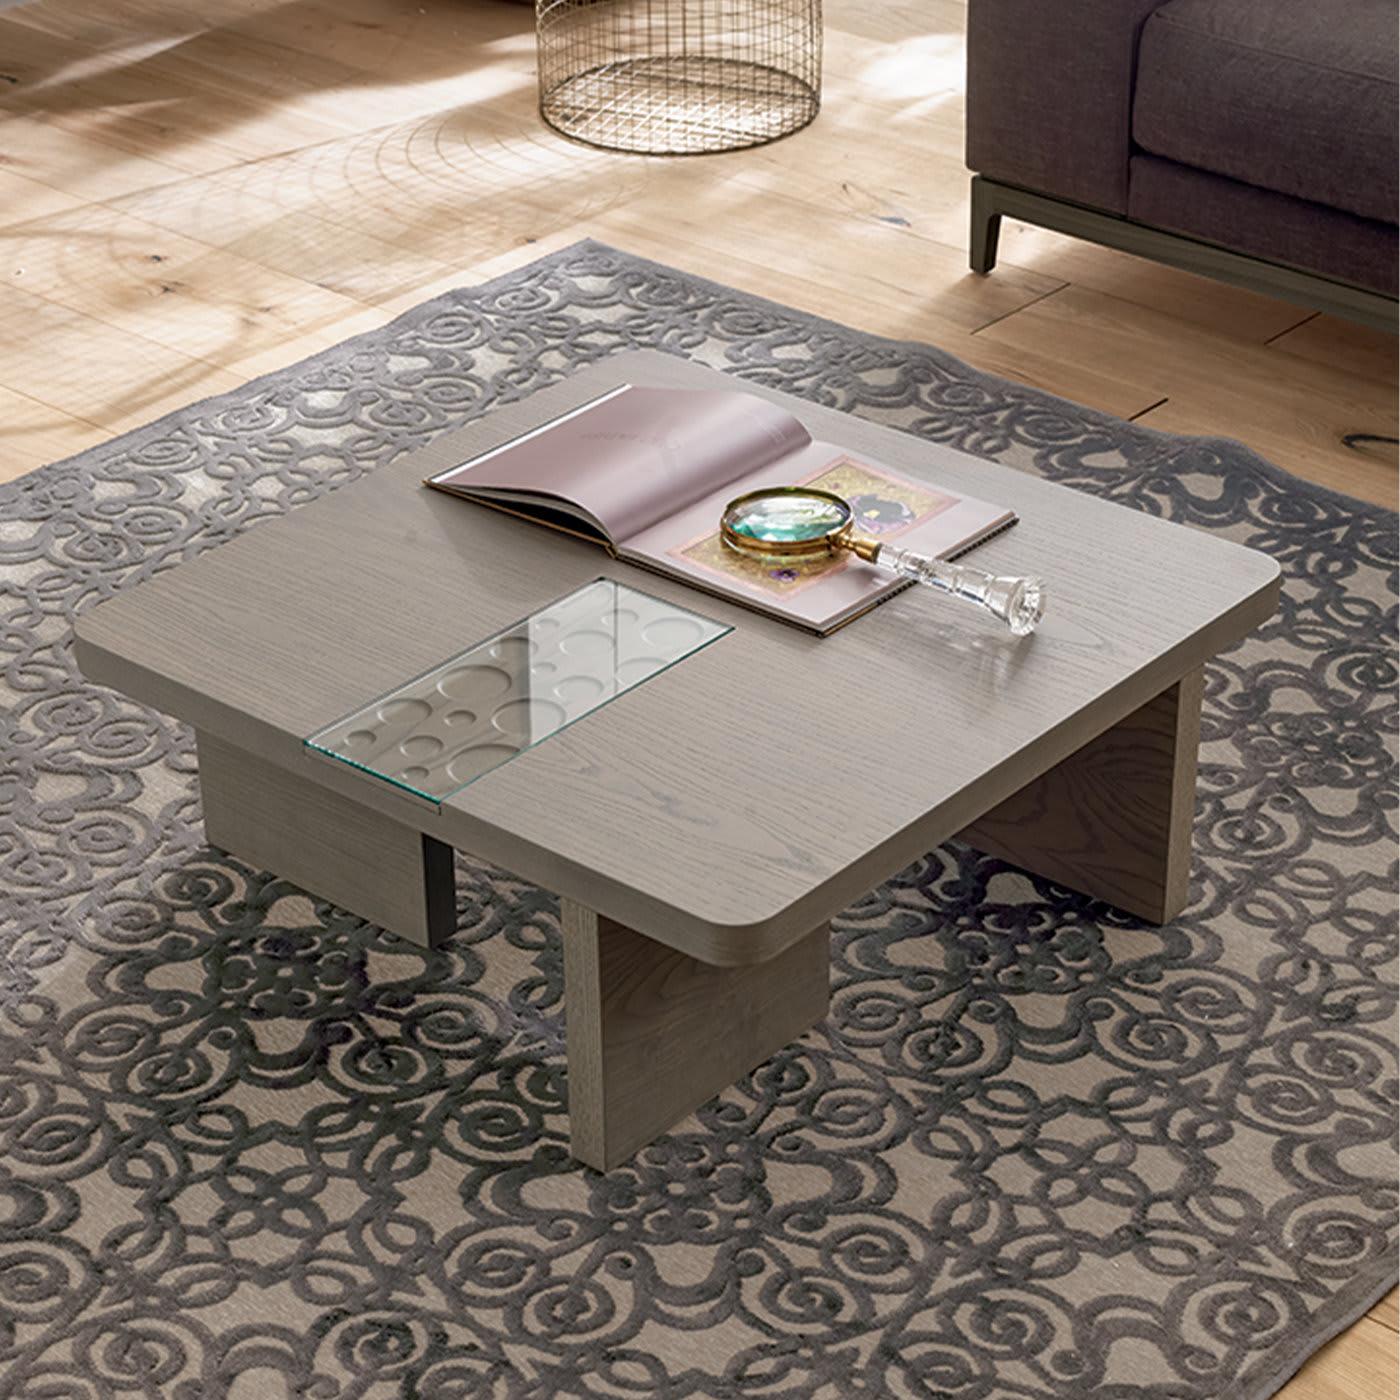 Inspired by marble working techniques, the Moon Coffee Table feature a panel with circular carvings, covered by a panel of transparent glass. The table is crafted in ash wood and coated with the finishing of your choosing, shown here in Modo10's